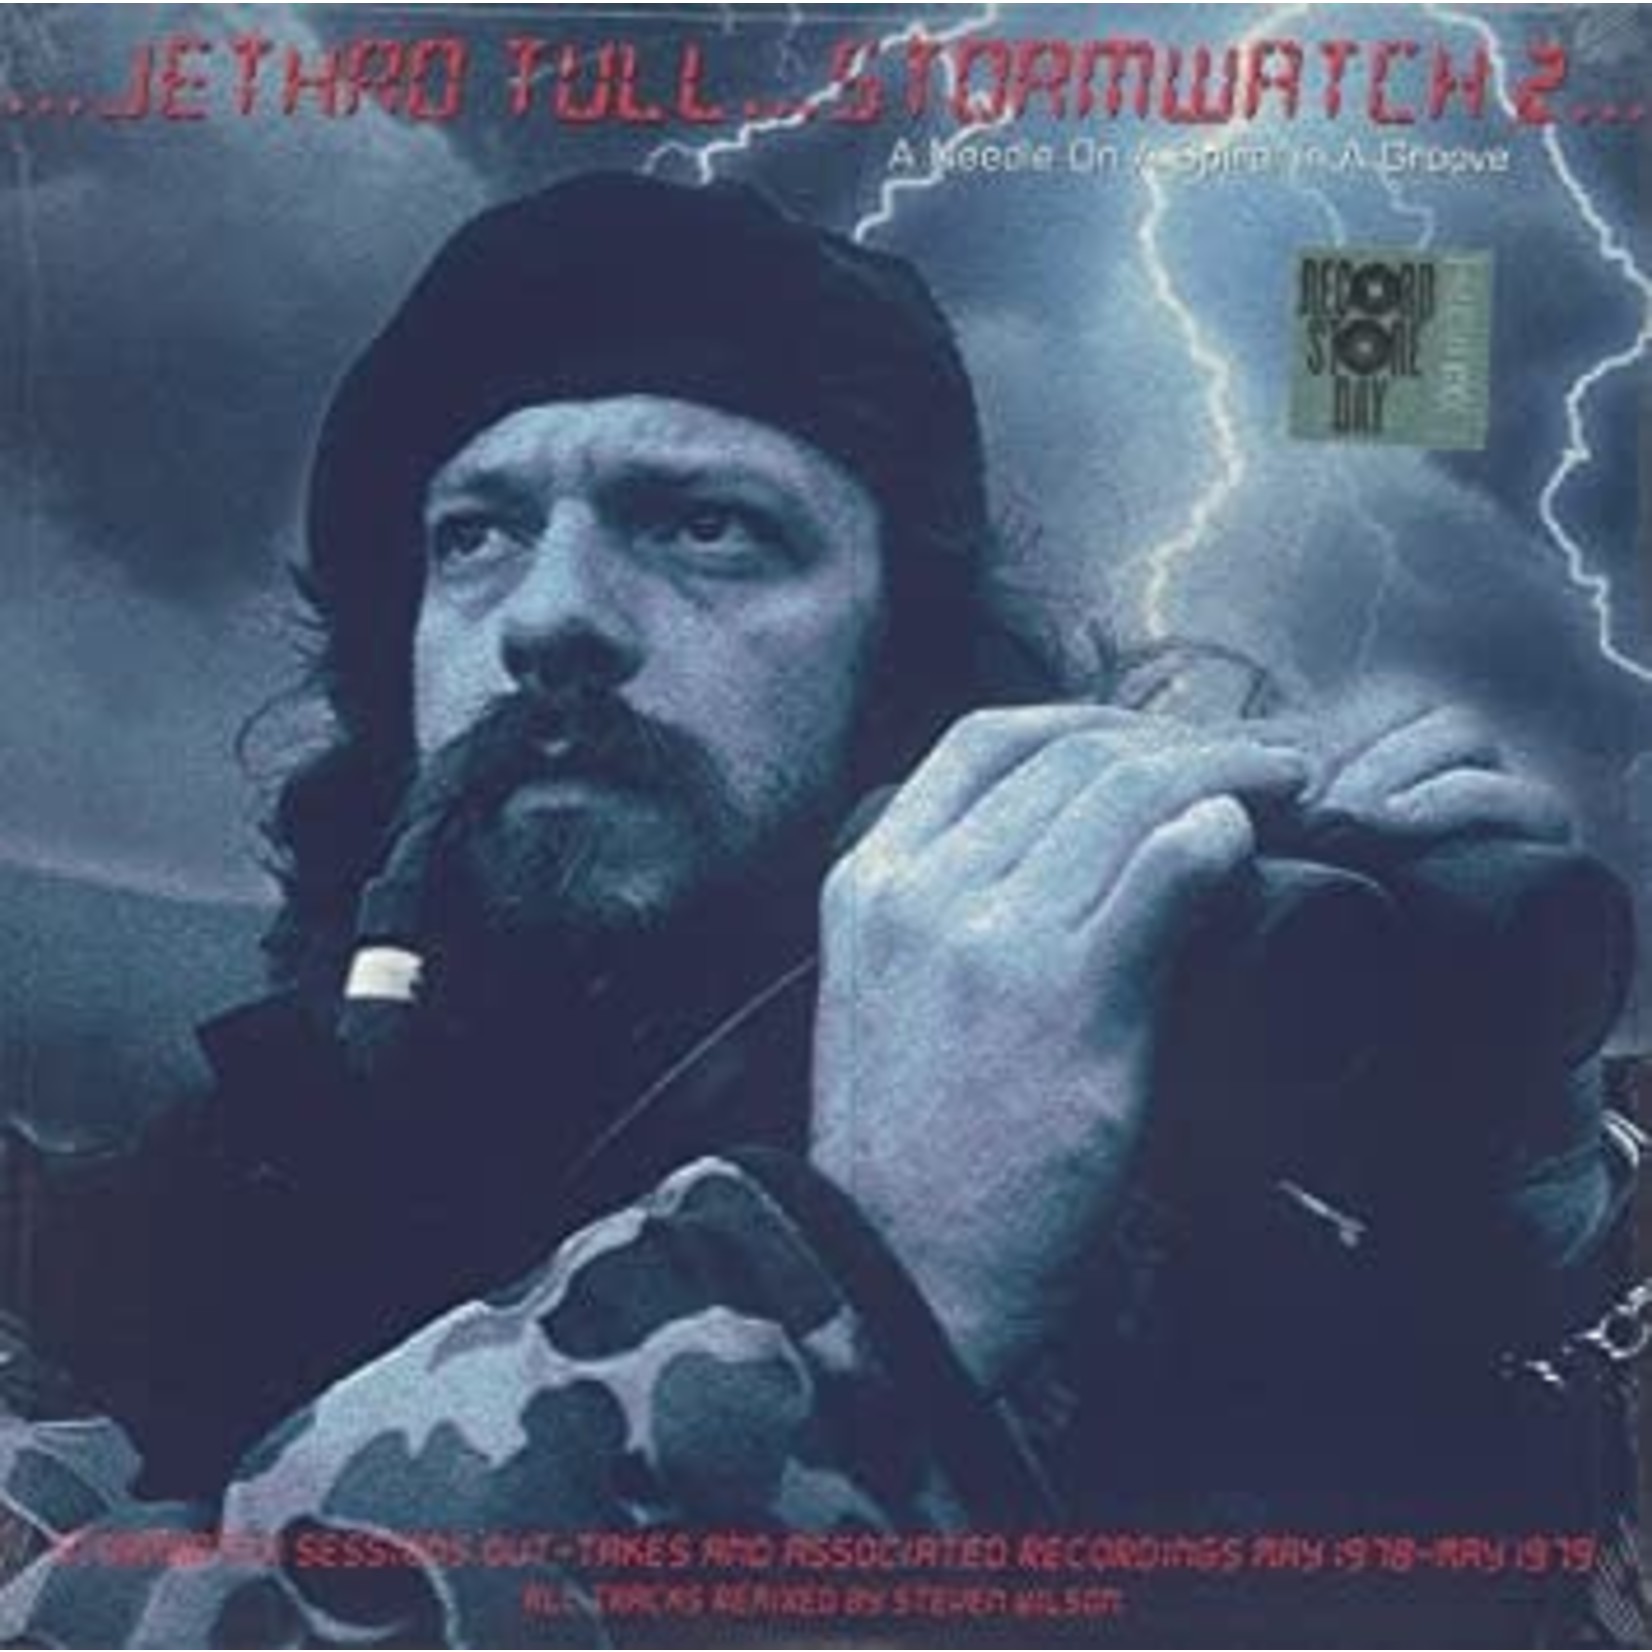 [New] Jethro Tull - Stormwatch 2... (A Needle On A Spiral In A Groove)